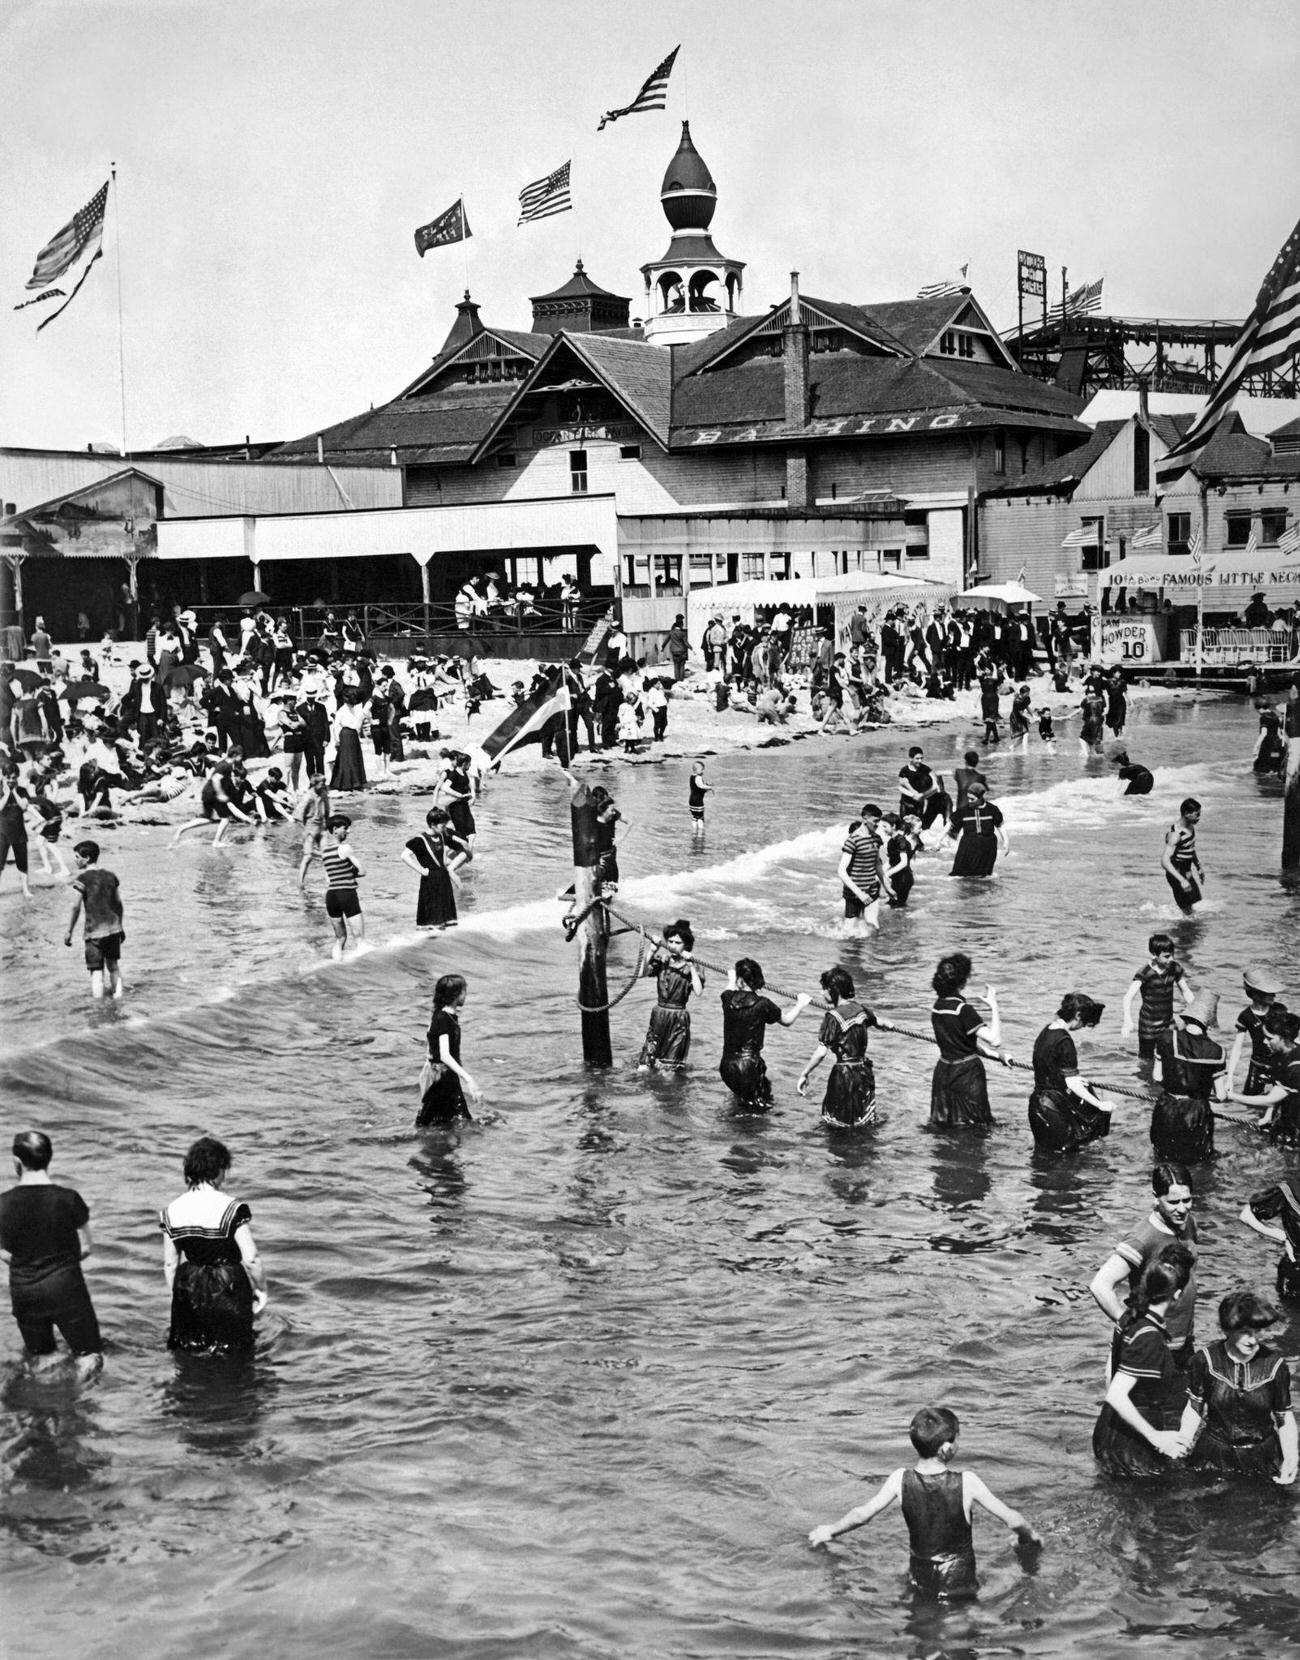 Bathers Playing In The Surf At Coney Island, 1904